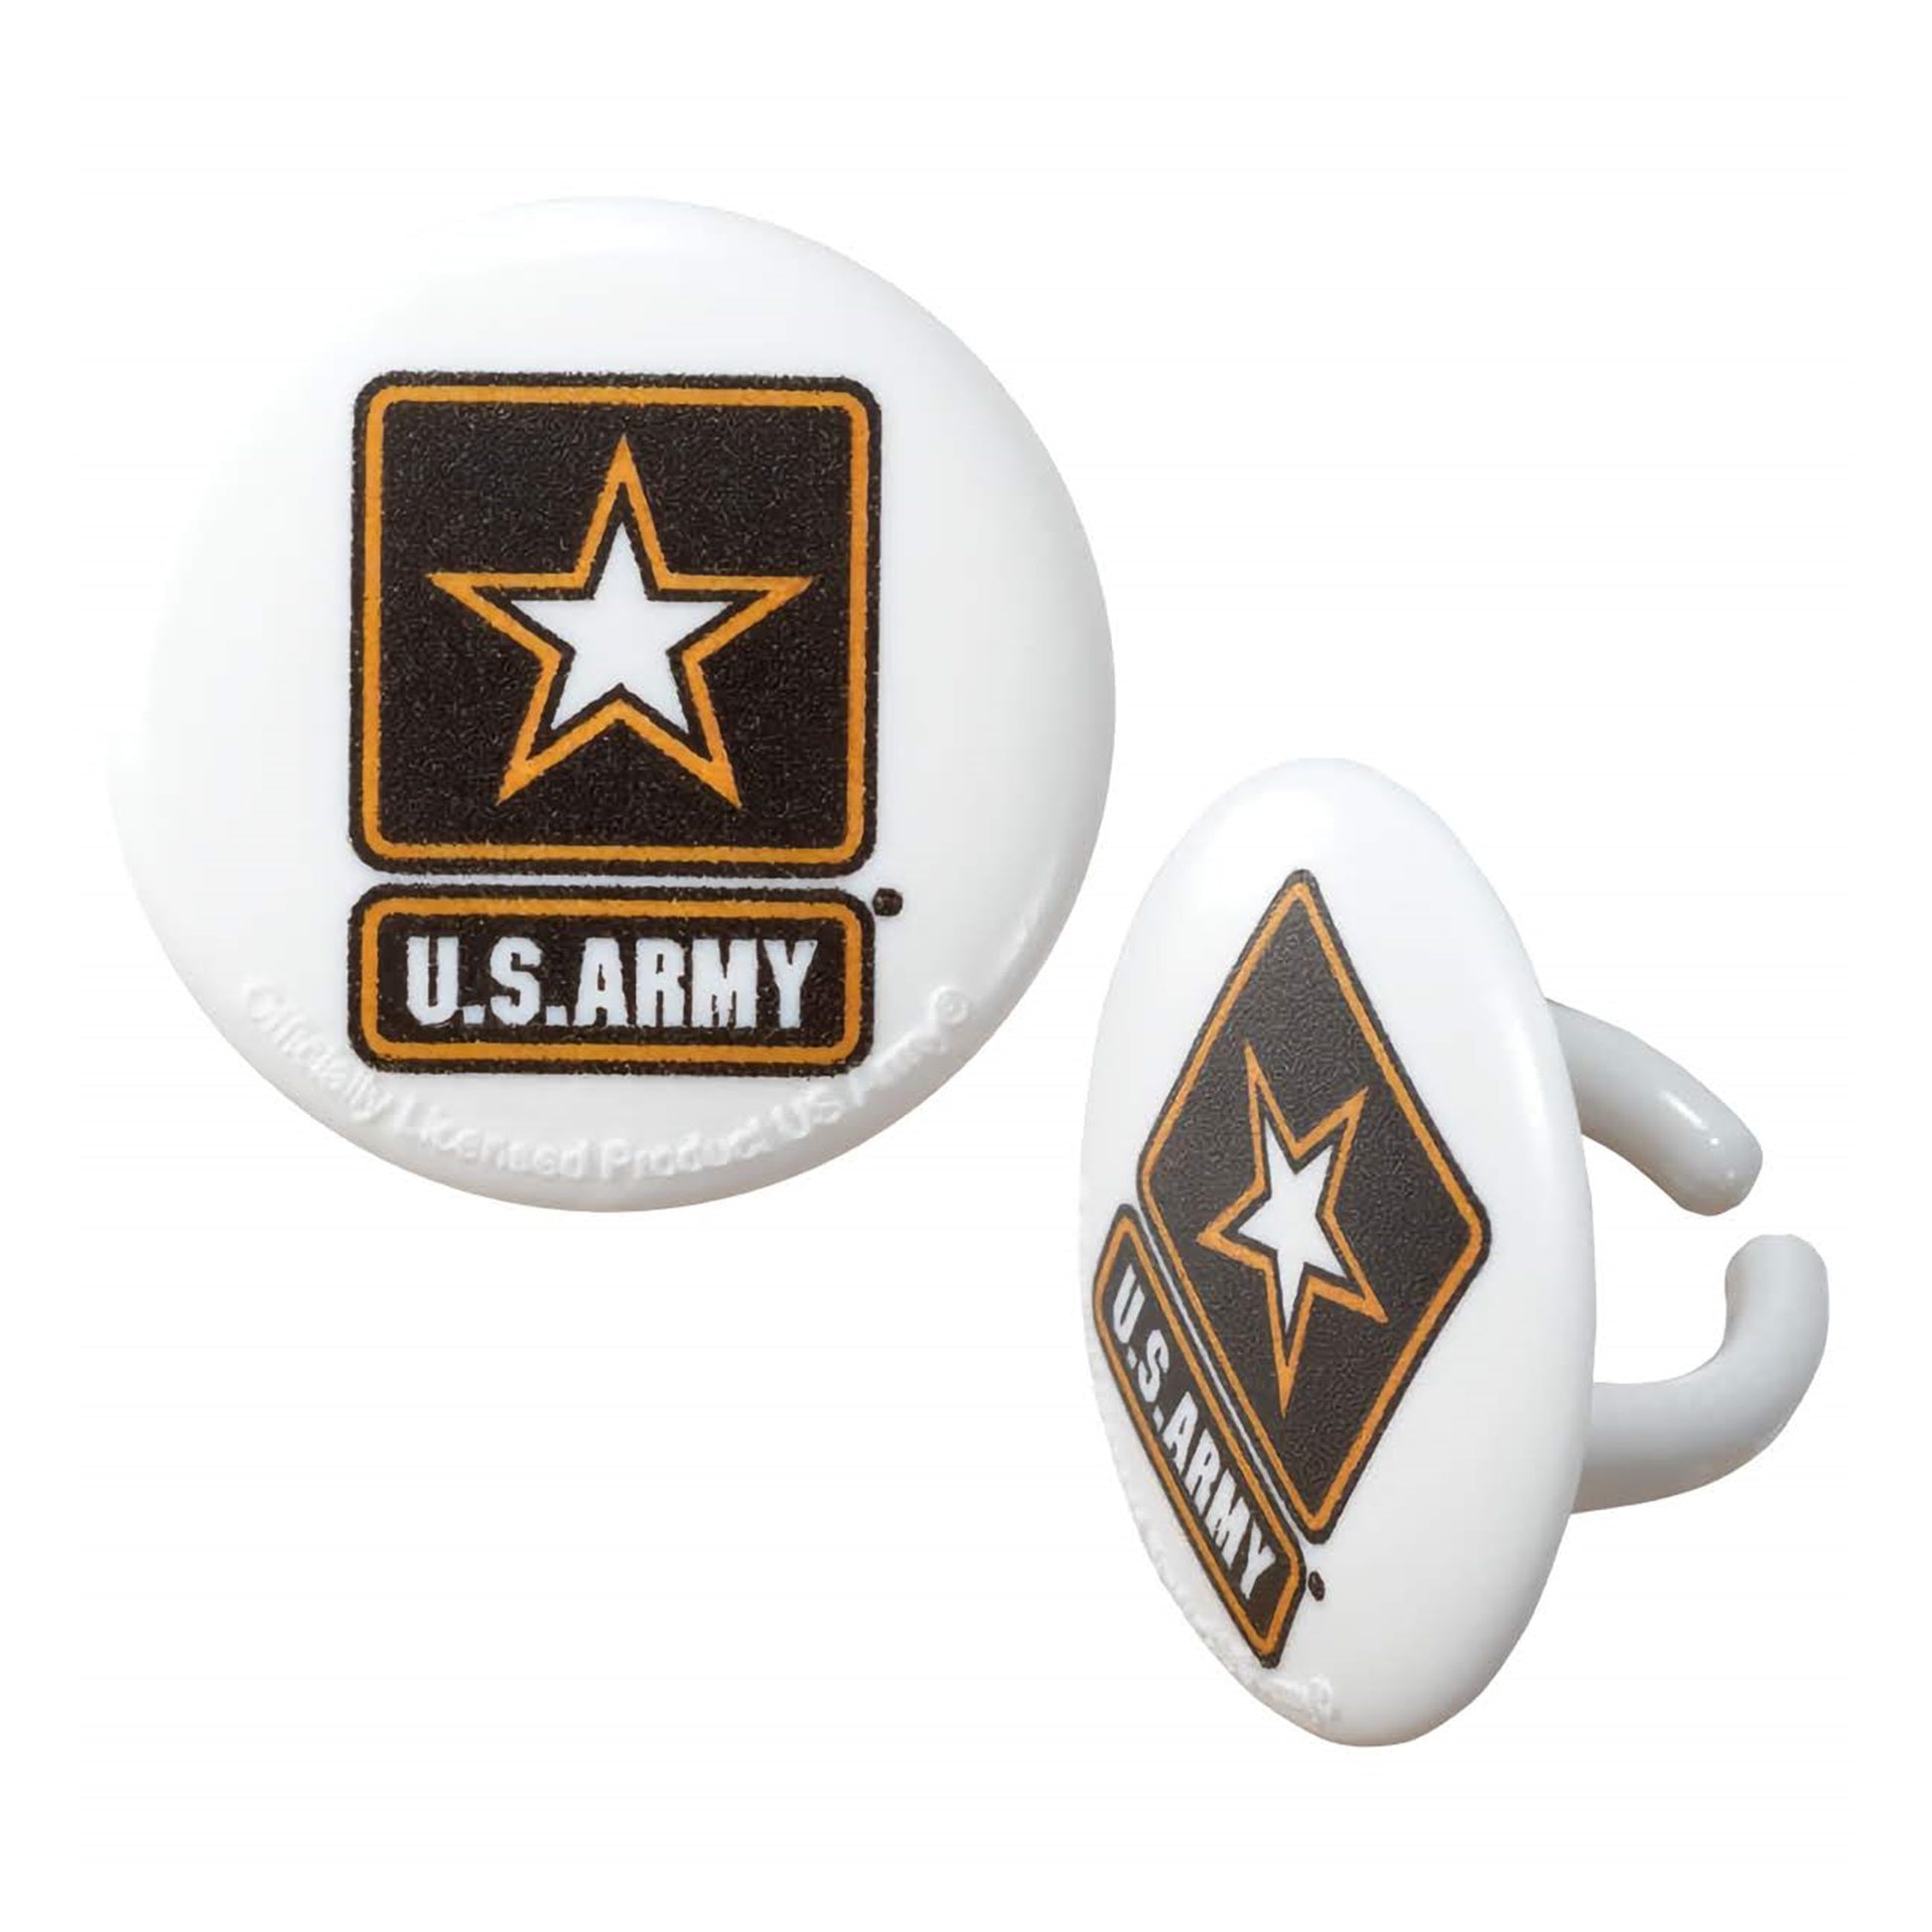 U.S. Army cupcake topper rings, featuring the Army star logo on a square background, appropriate for Army promotion parties, boot camp graduations, or to show support for troops.